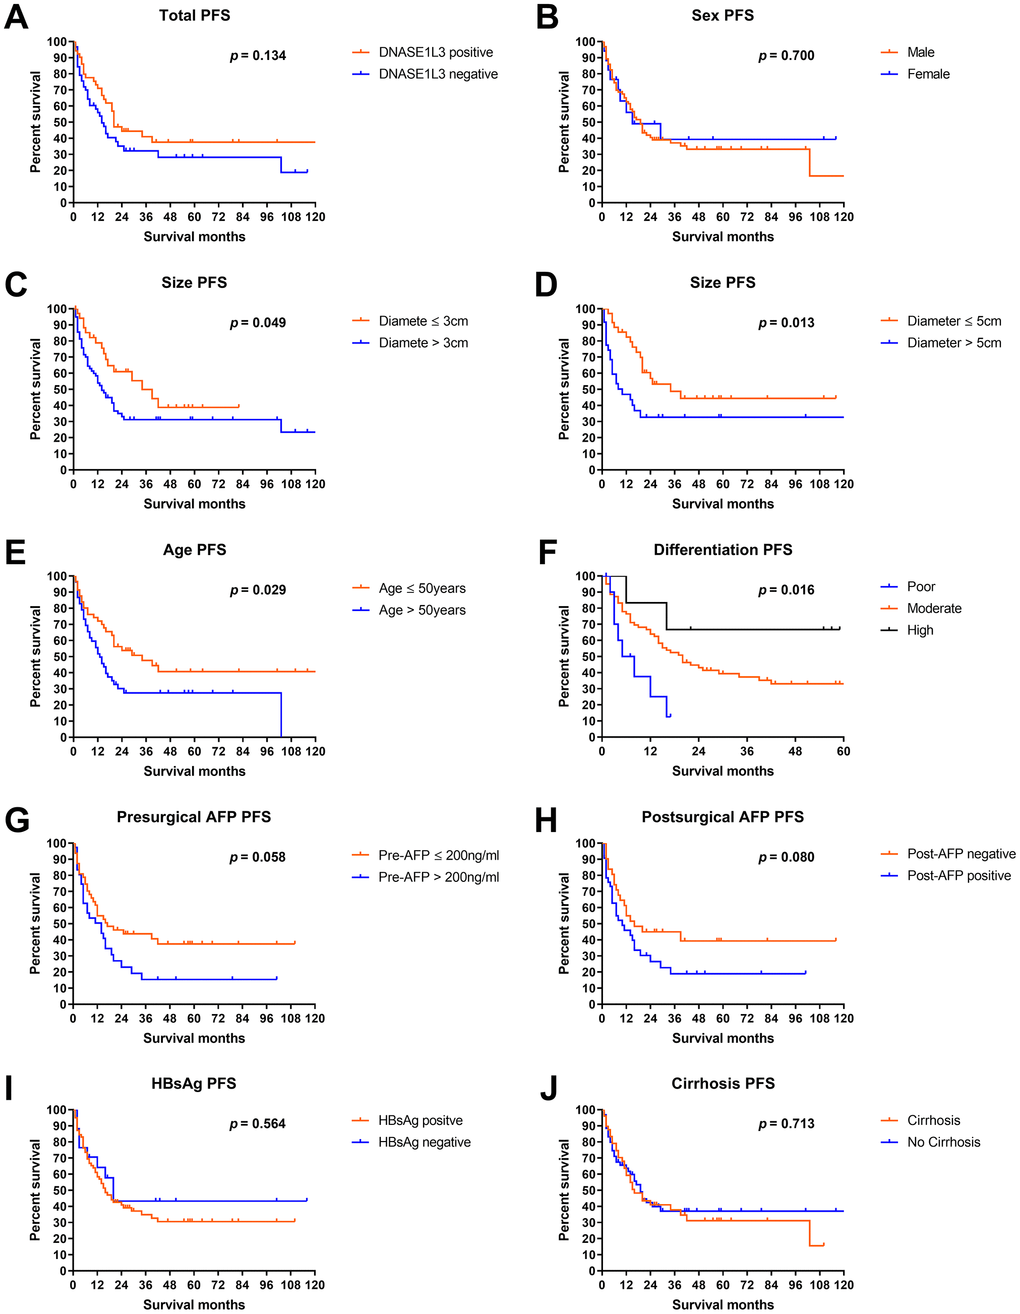 Progression-free survival analyses by DNASE1L3 expression level. Progression-free survival analyses according to DNASE1L3 status in all patients (A) or according to sex (B), size (C, D), age (E), differentiation level (F), presurgical AFP (G), postsurgical AFP (H), HBsAg level (I) and cirrhosis status (J).